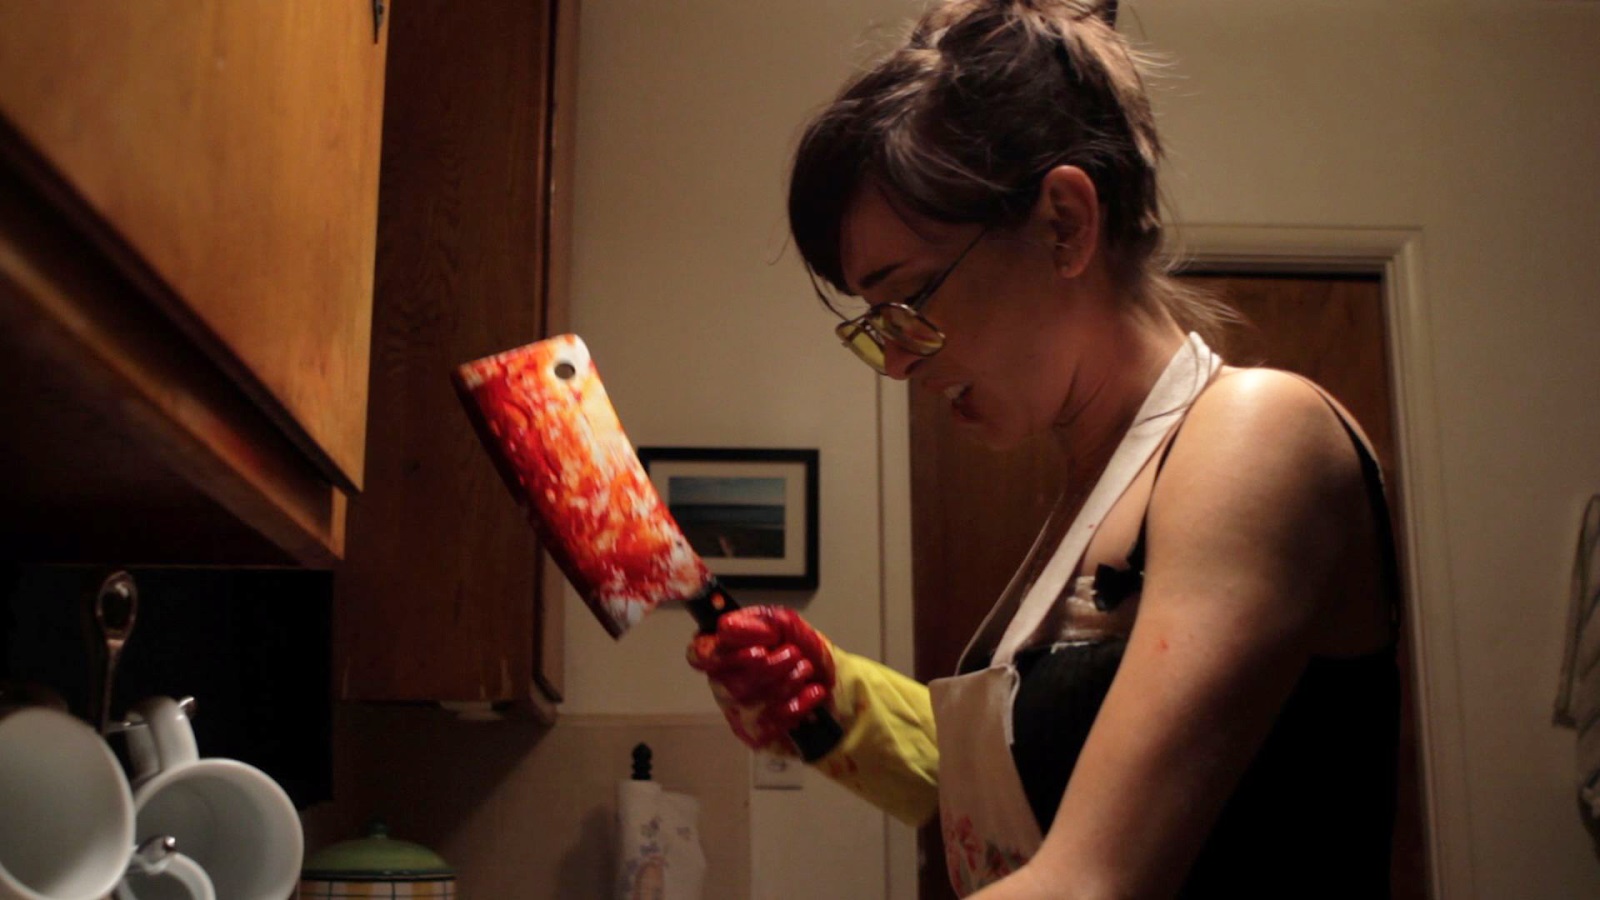 Not the Alice in Wonderland you knew as a child - Alyce (Jade Dornfeld) carves up a body with a meat cleaver in Alyce (2011)